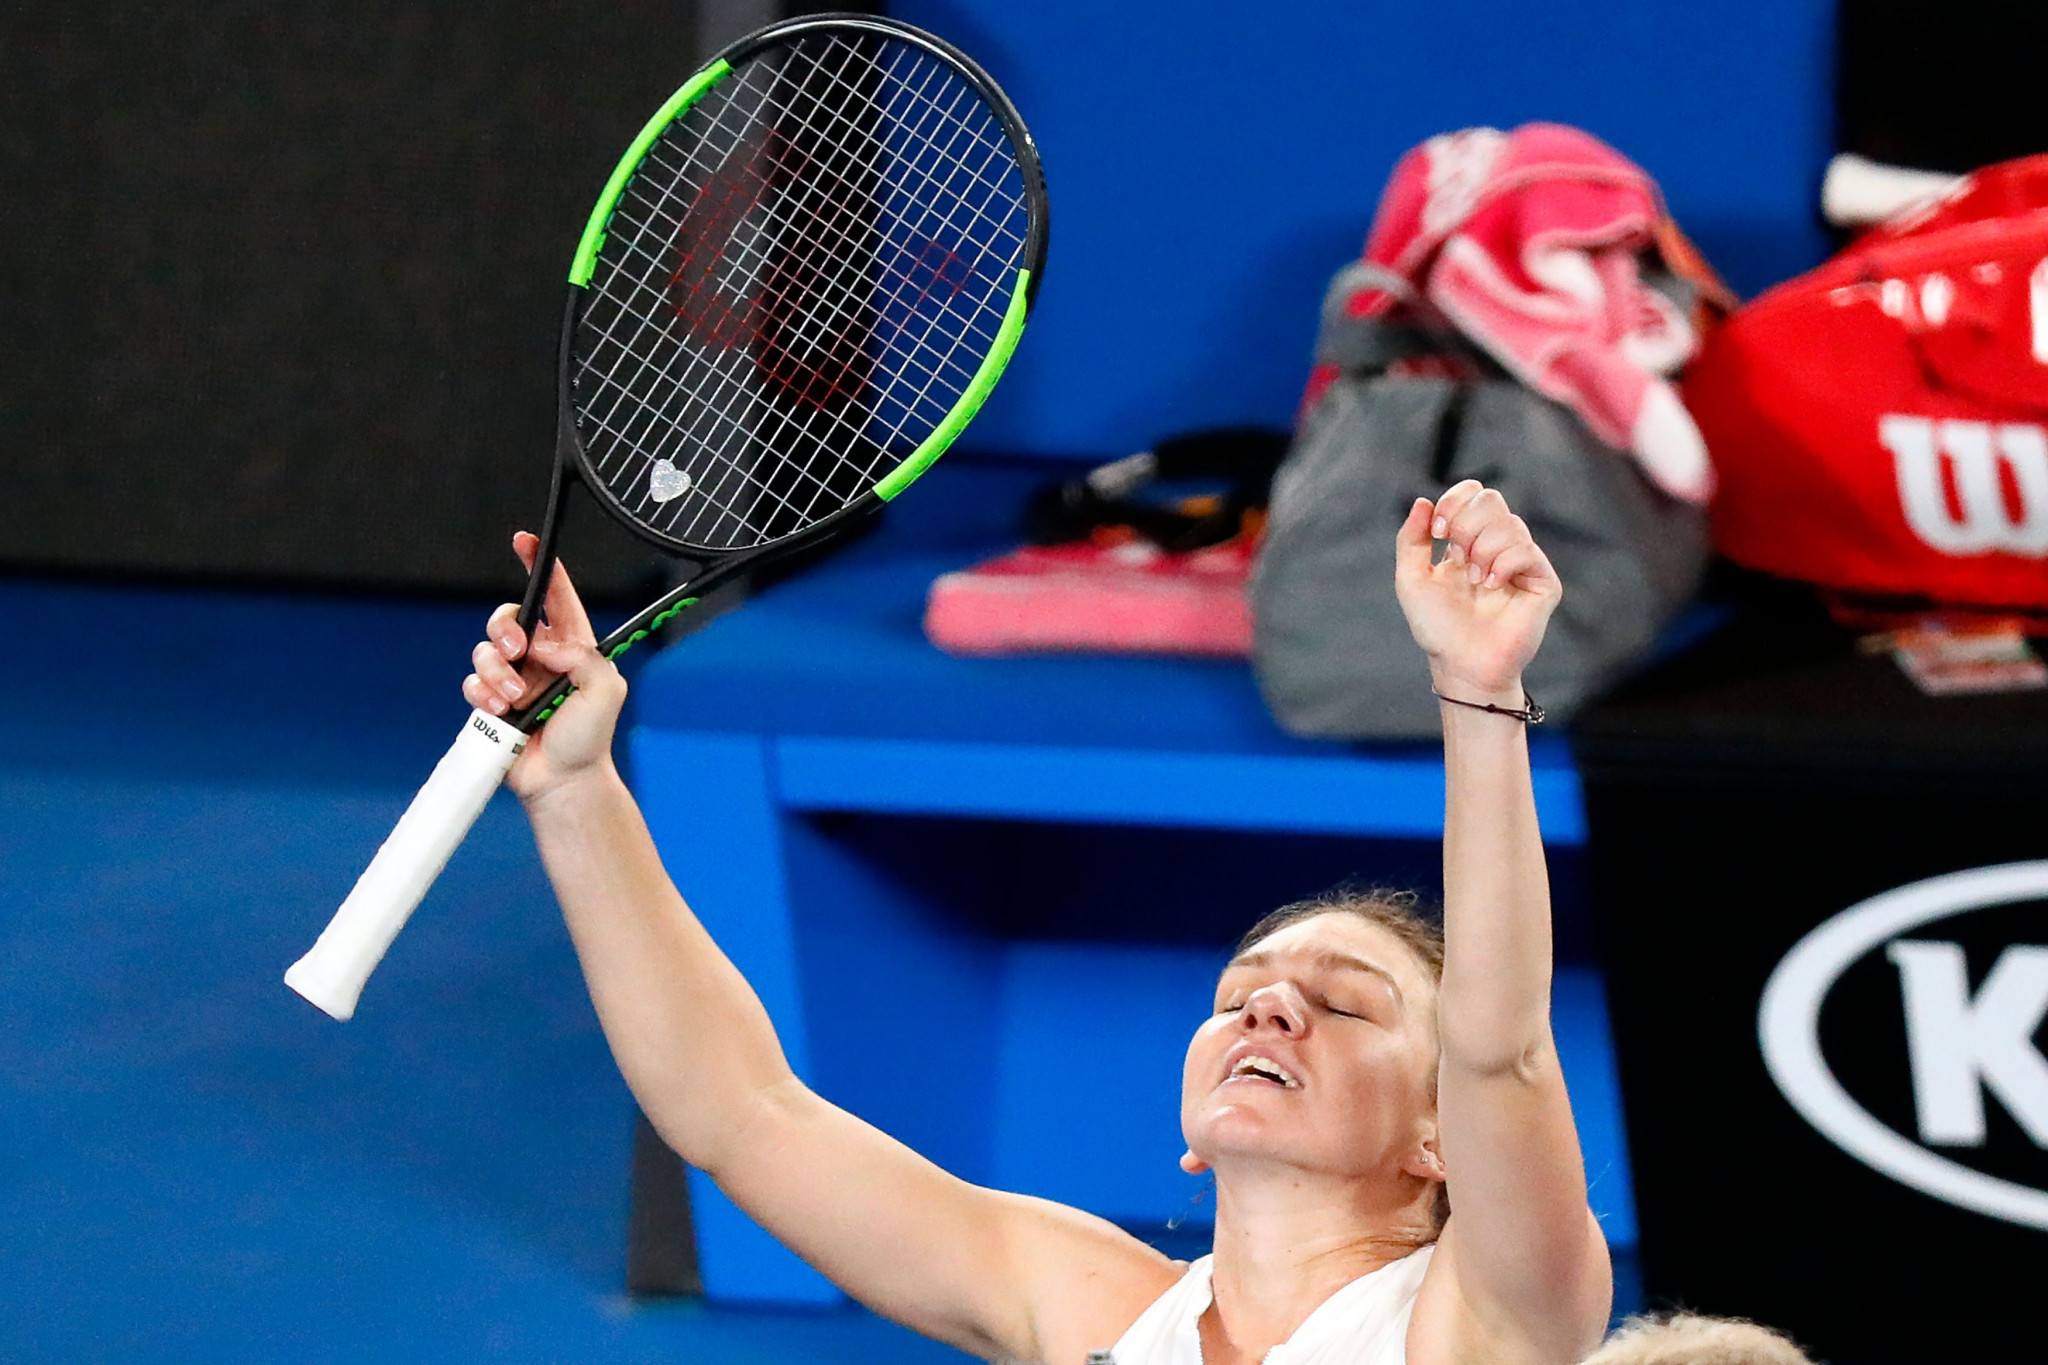 Women's world number one Simona Halep survived a scare as she needed three sets to get past Sofia Kenin of the United States ©Getty Images